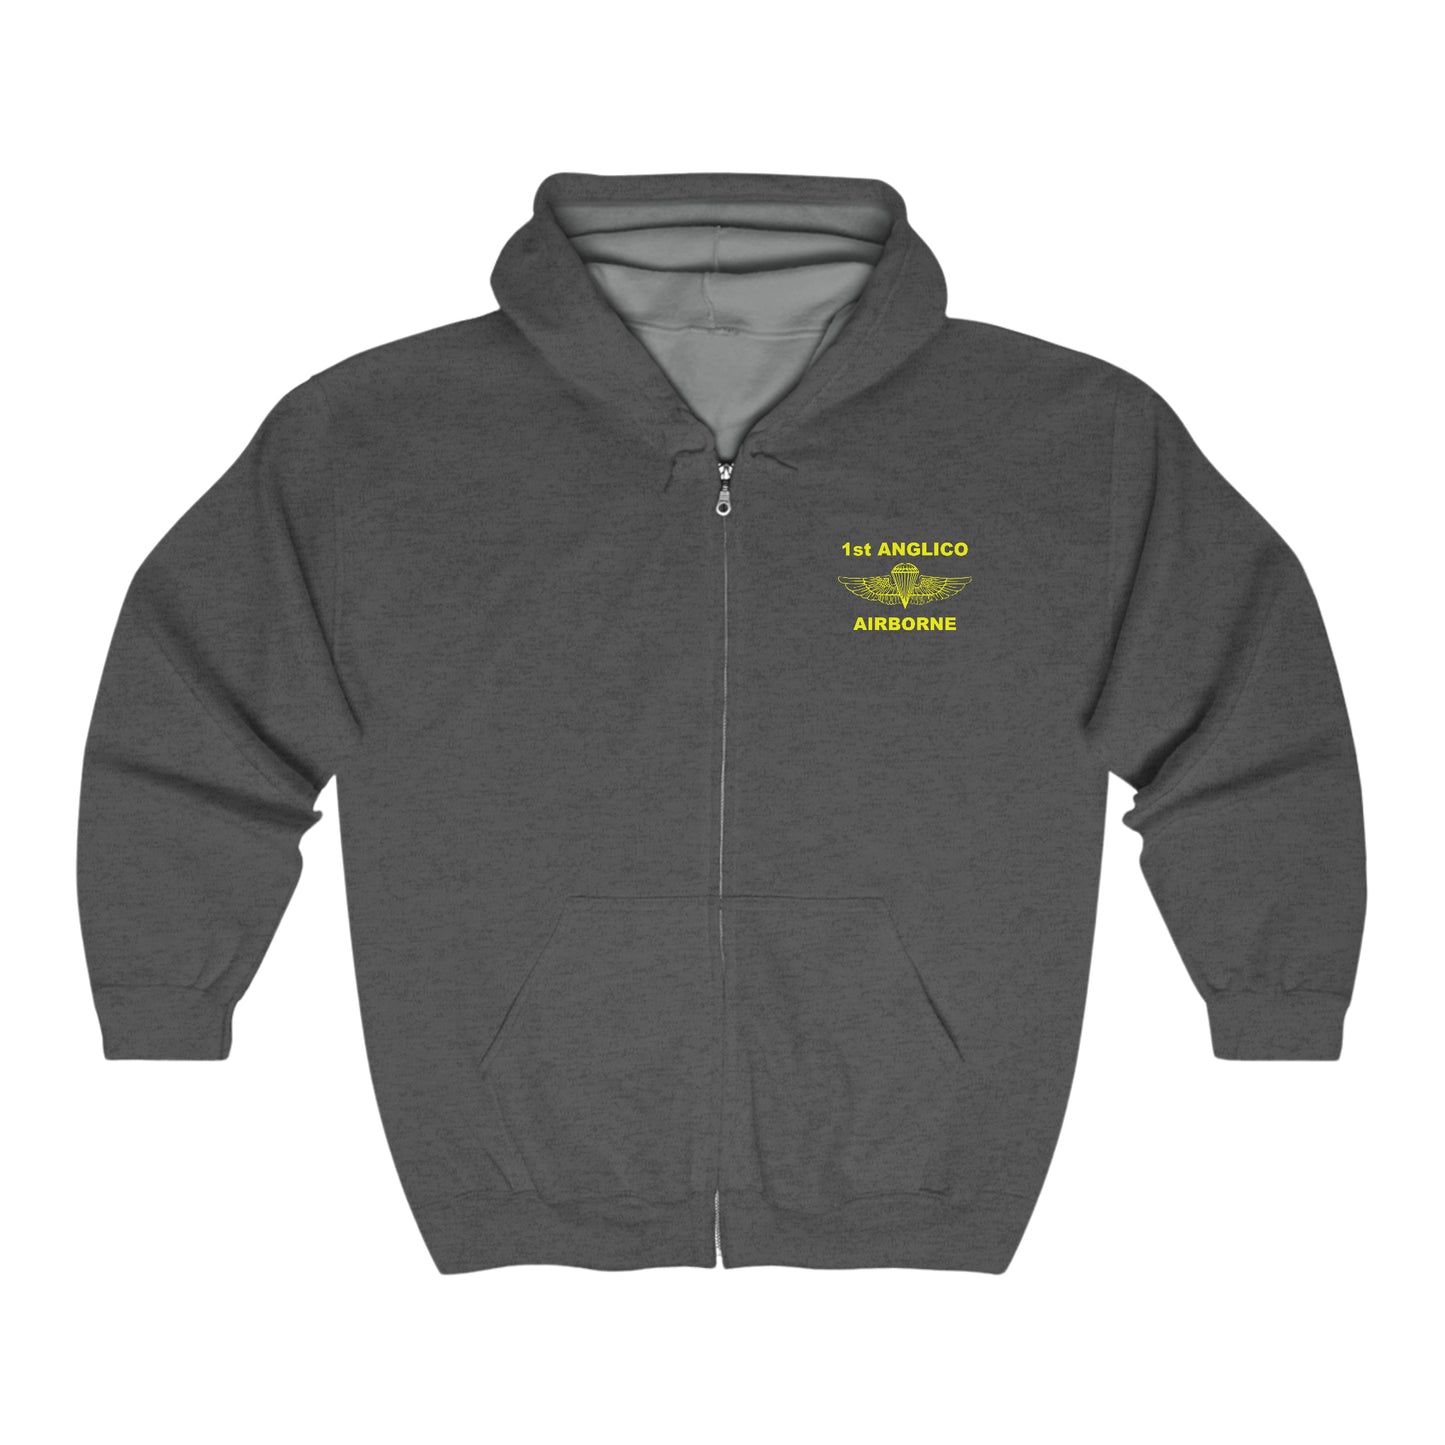 1st ANGLICO Classic Zip Hoodie